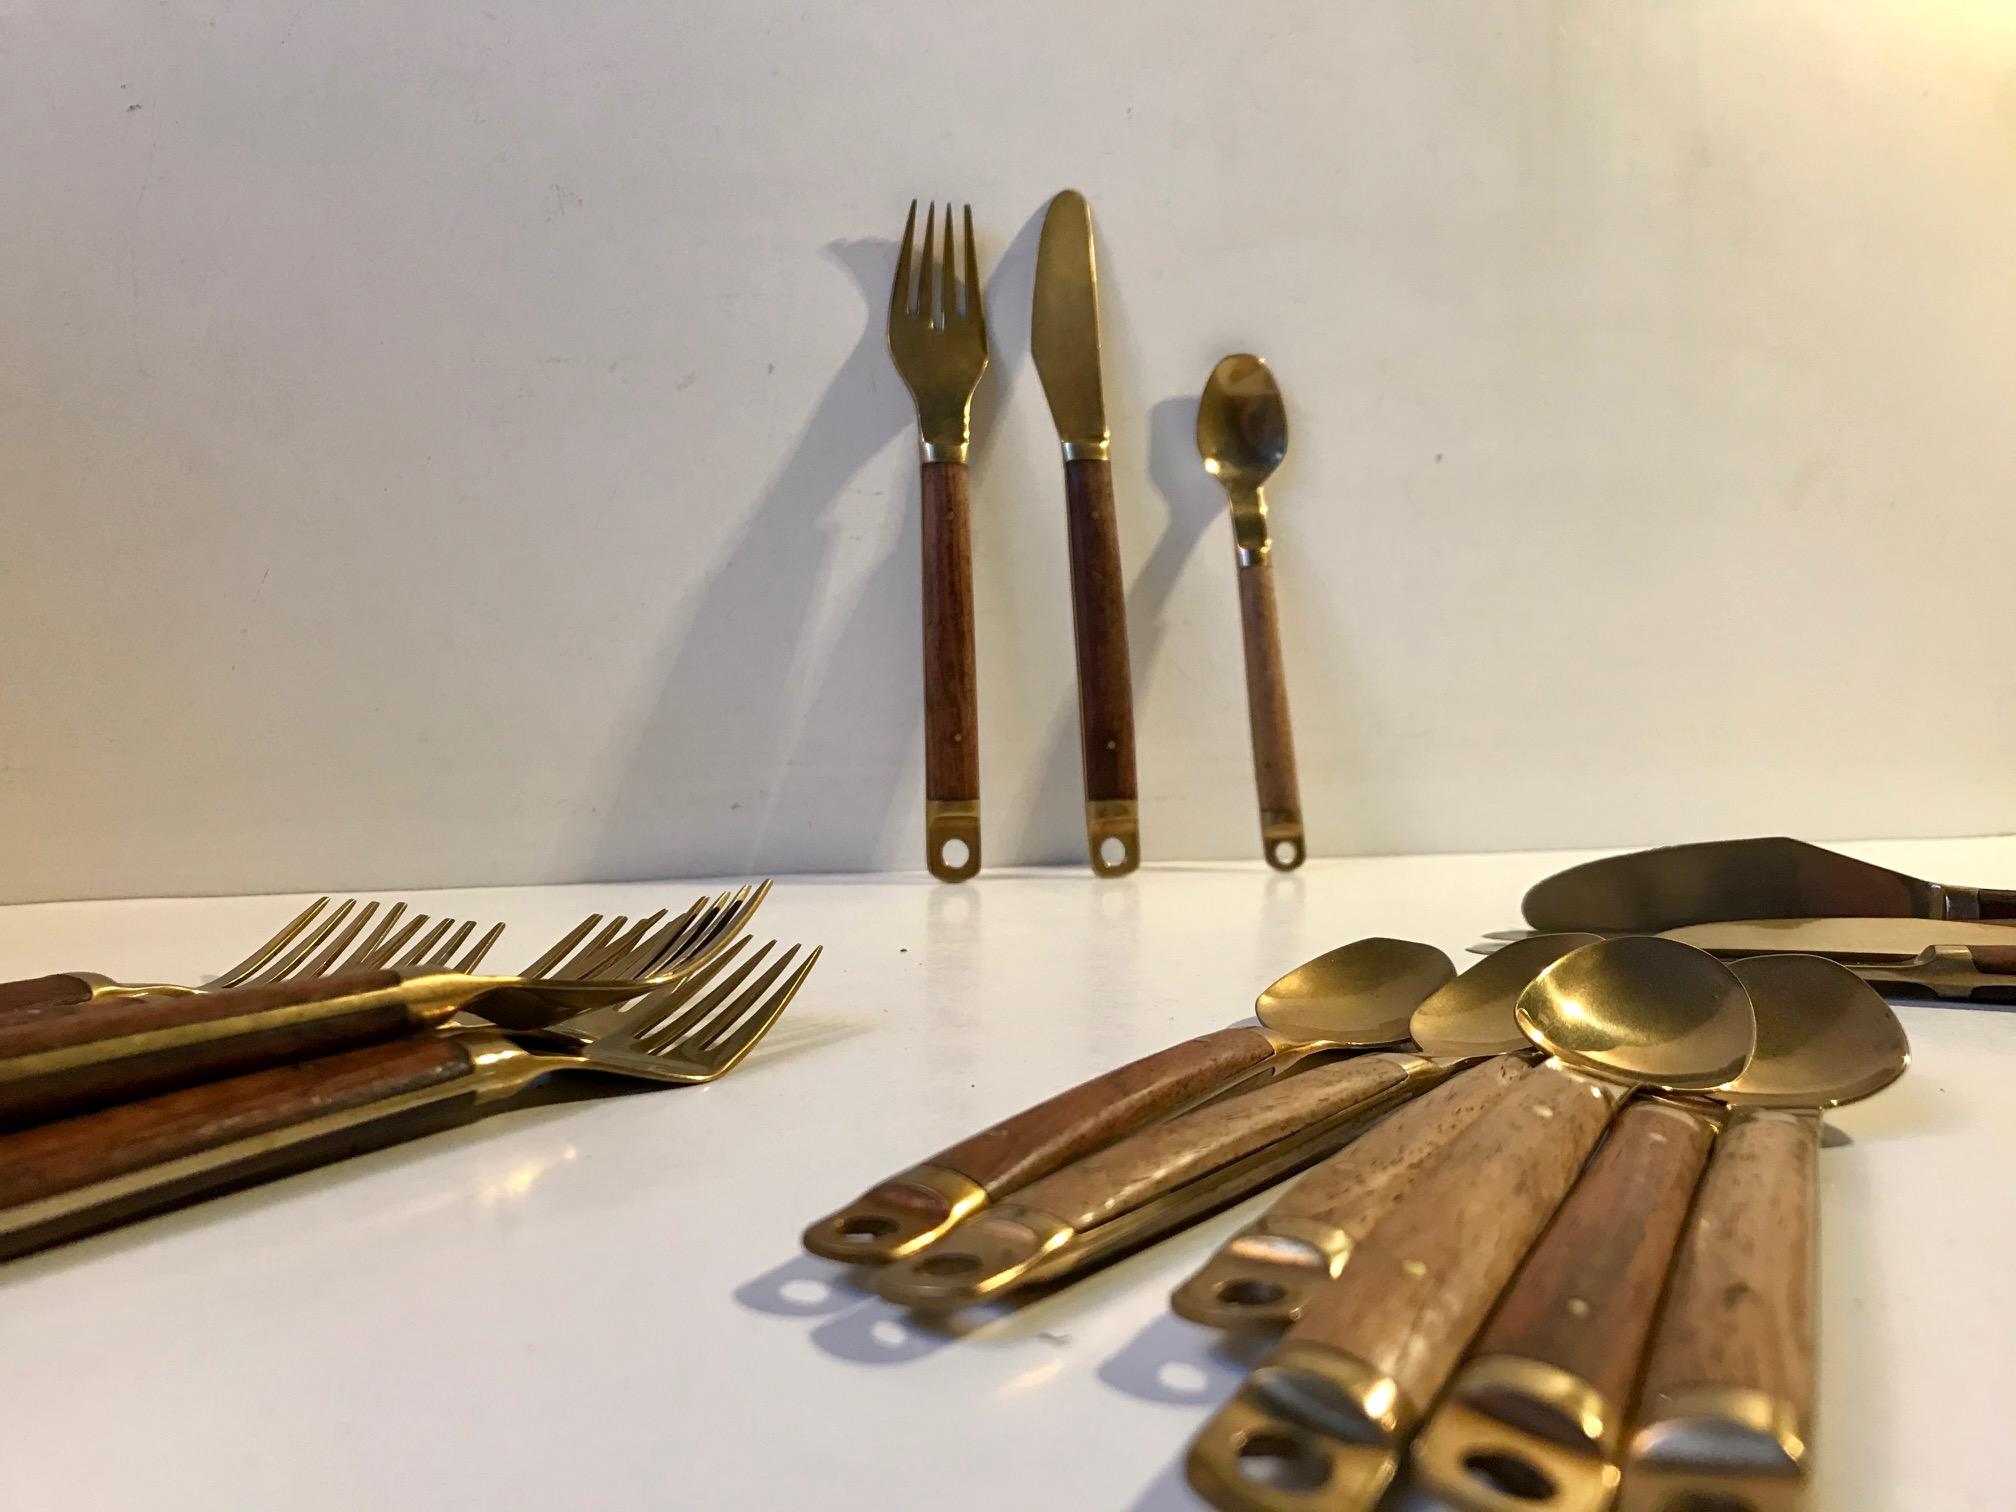 This dining/lunch set by Carl Cohr was manufactured and designed in Denmark in the 1960s. The set consists of 7 knives, 7 forks and 7 dessert spoons . A rather practical feature of the design is the hole to the top of each piece. Length: 20/19/15 cm.